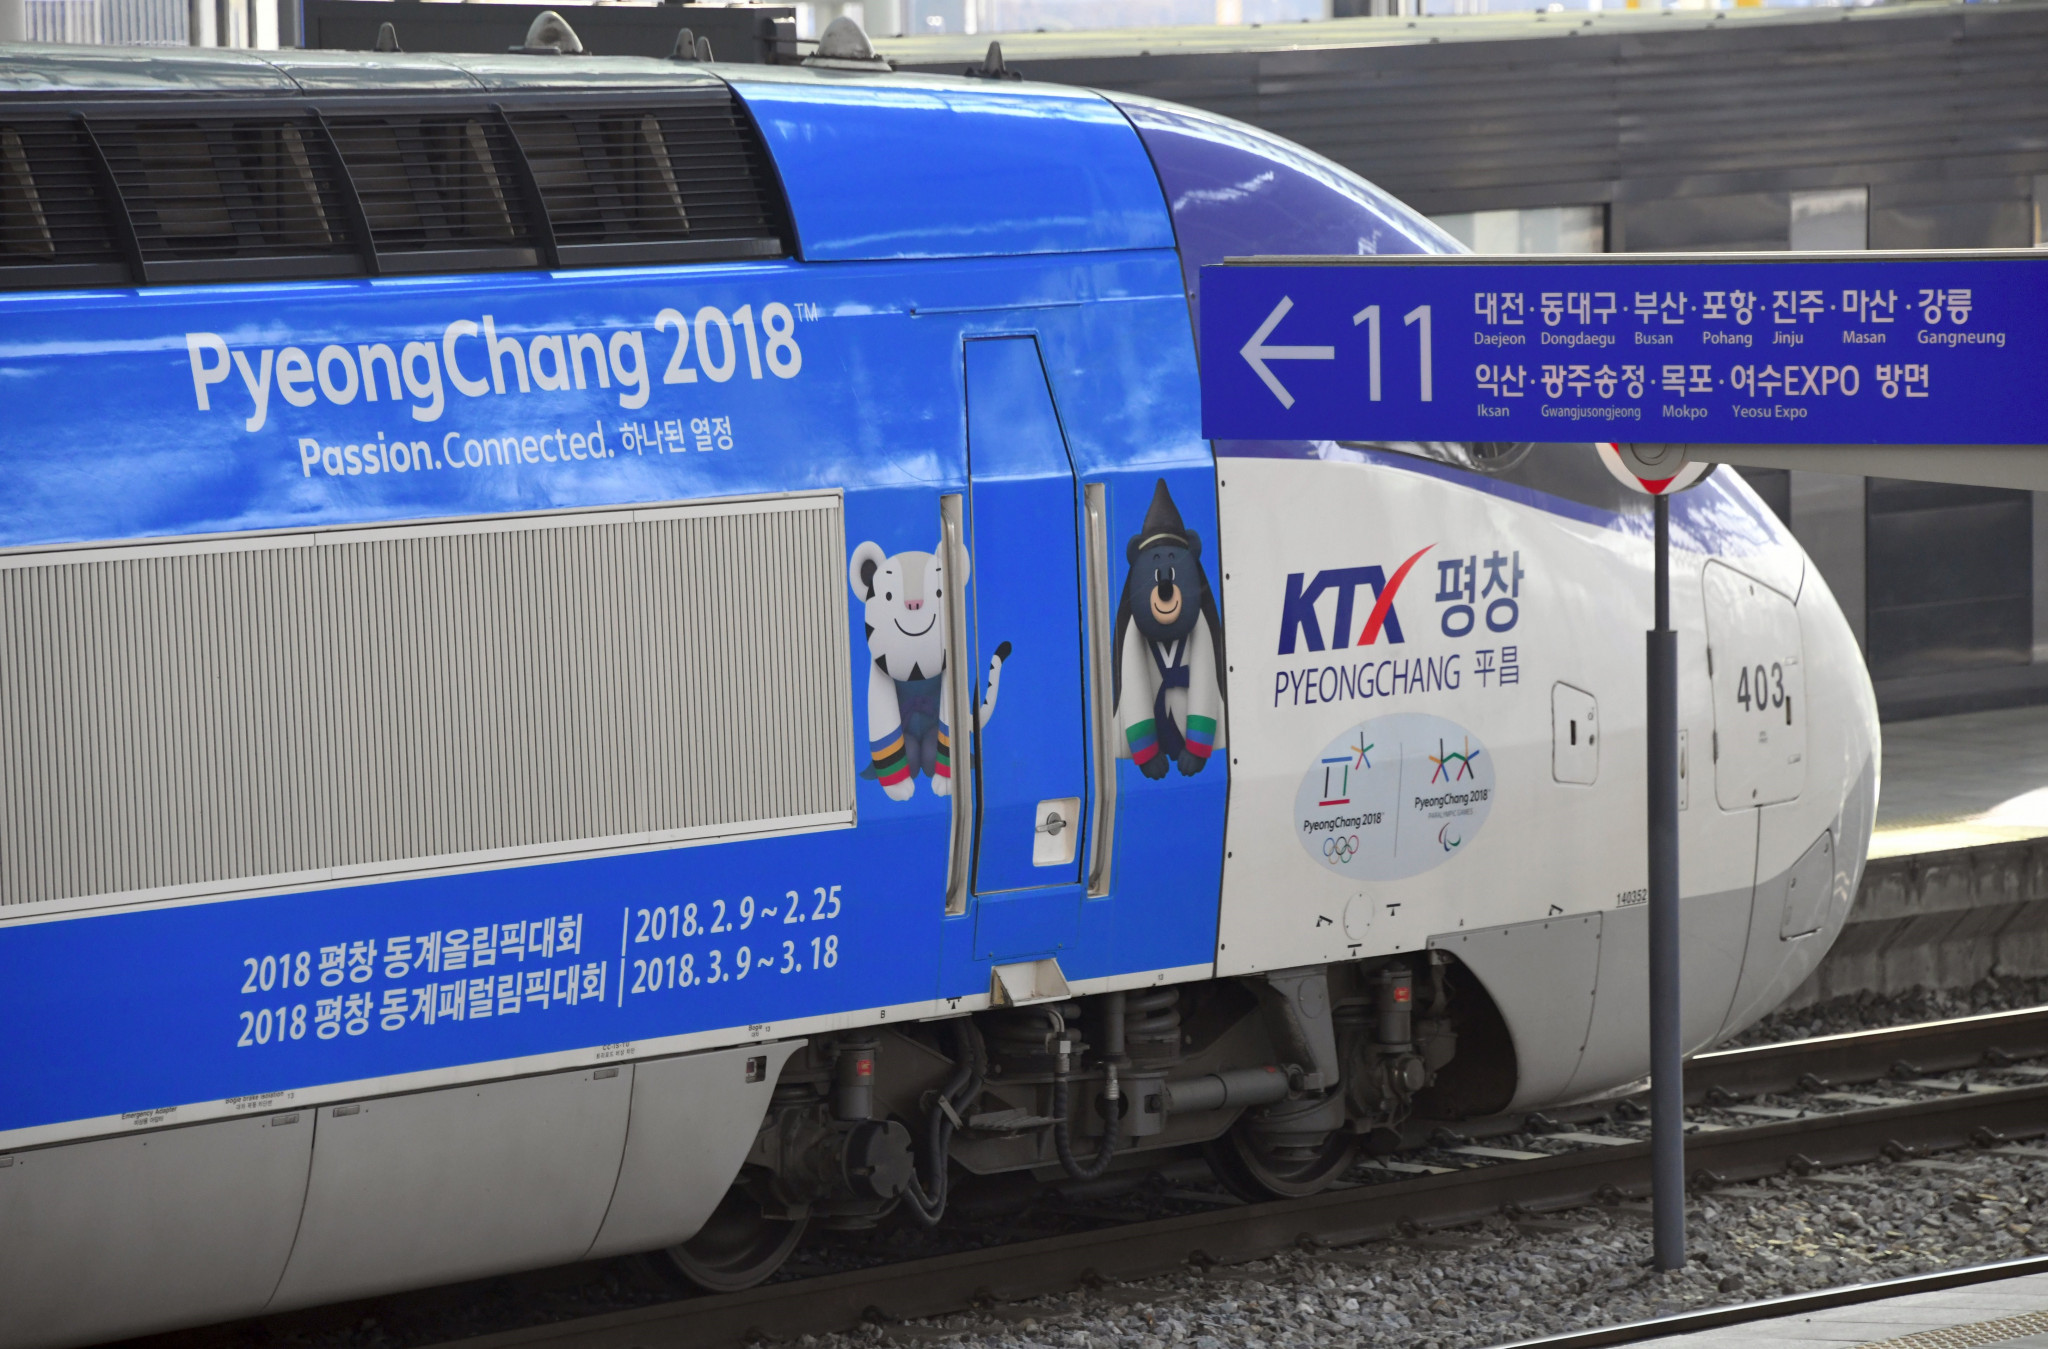 Official Pyeongchang 2018 transport app launched